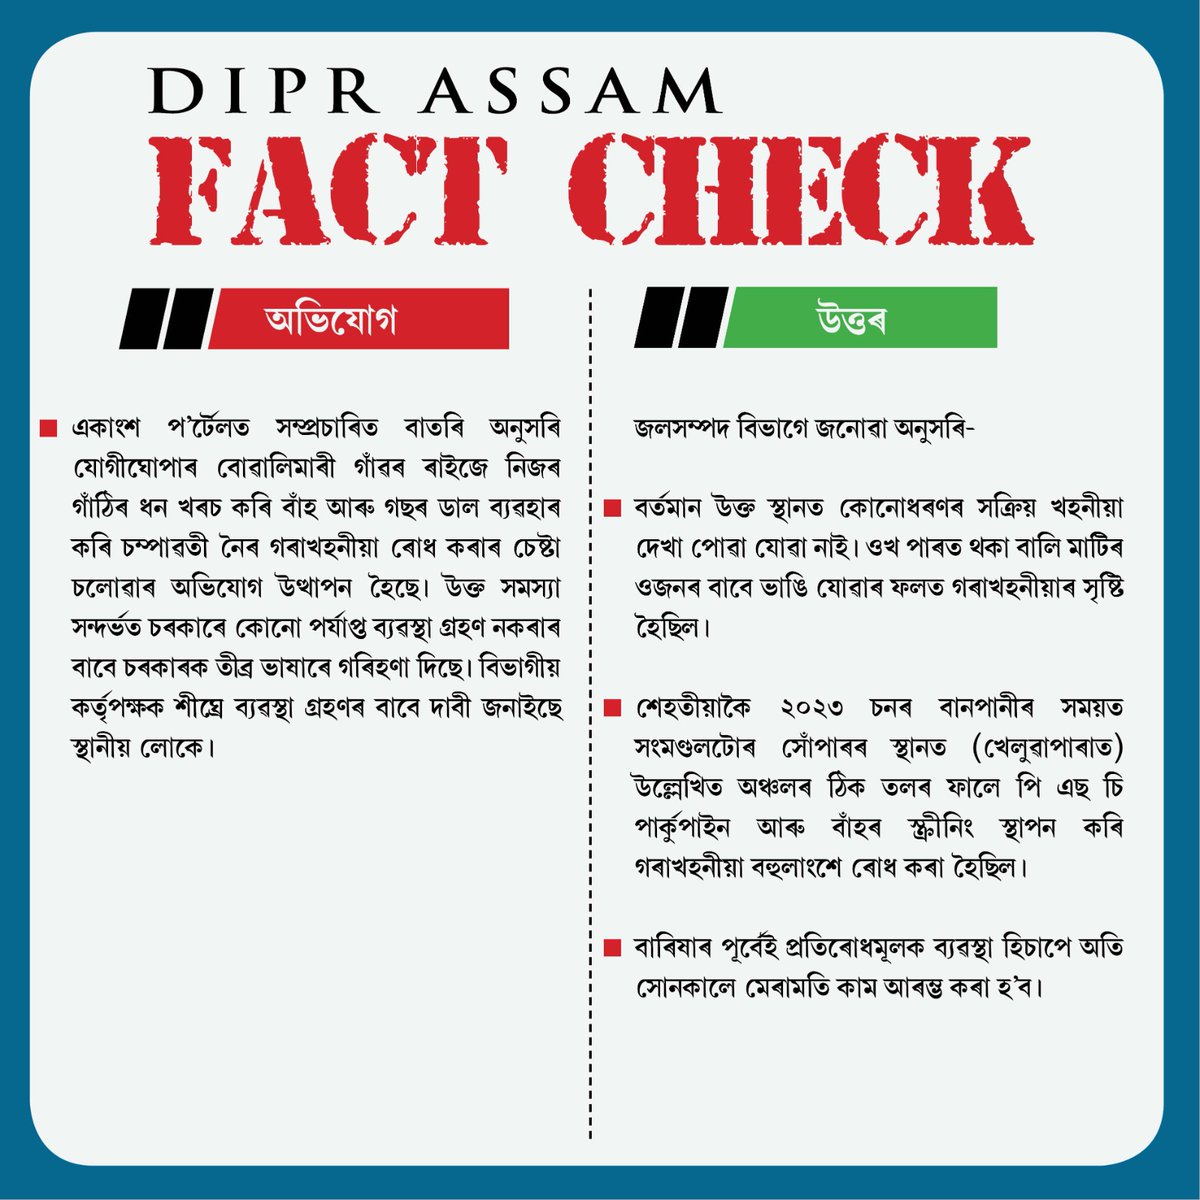 #DIPRAssamFactCheck | Response from the Water Resources Deptt regarding a news report published by a few news portals alleging the government of taking no action to prevent erosion caused by the Champavati river at Boalimari village of Jogighopa.